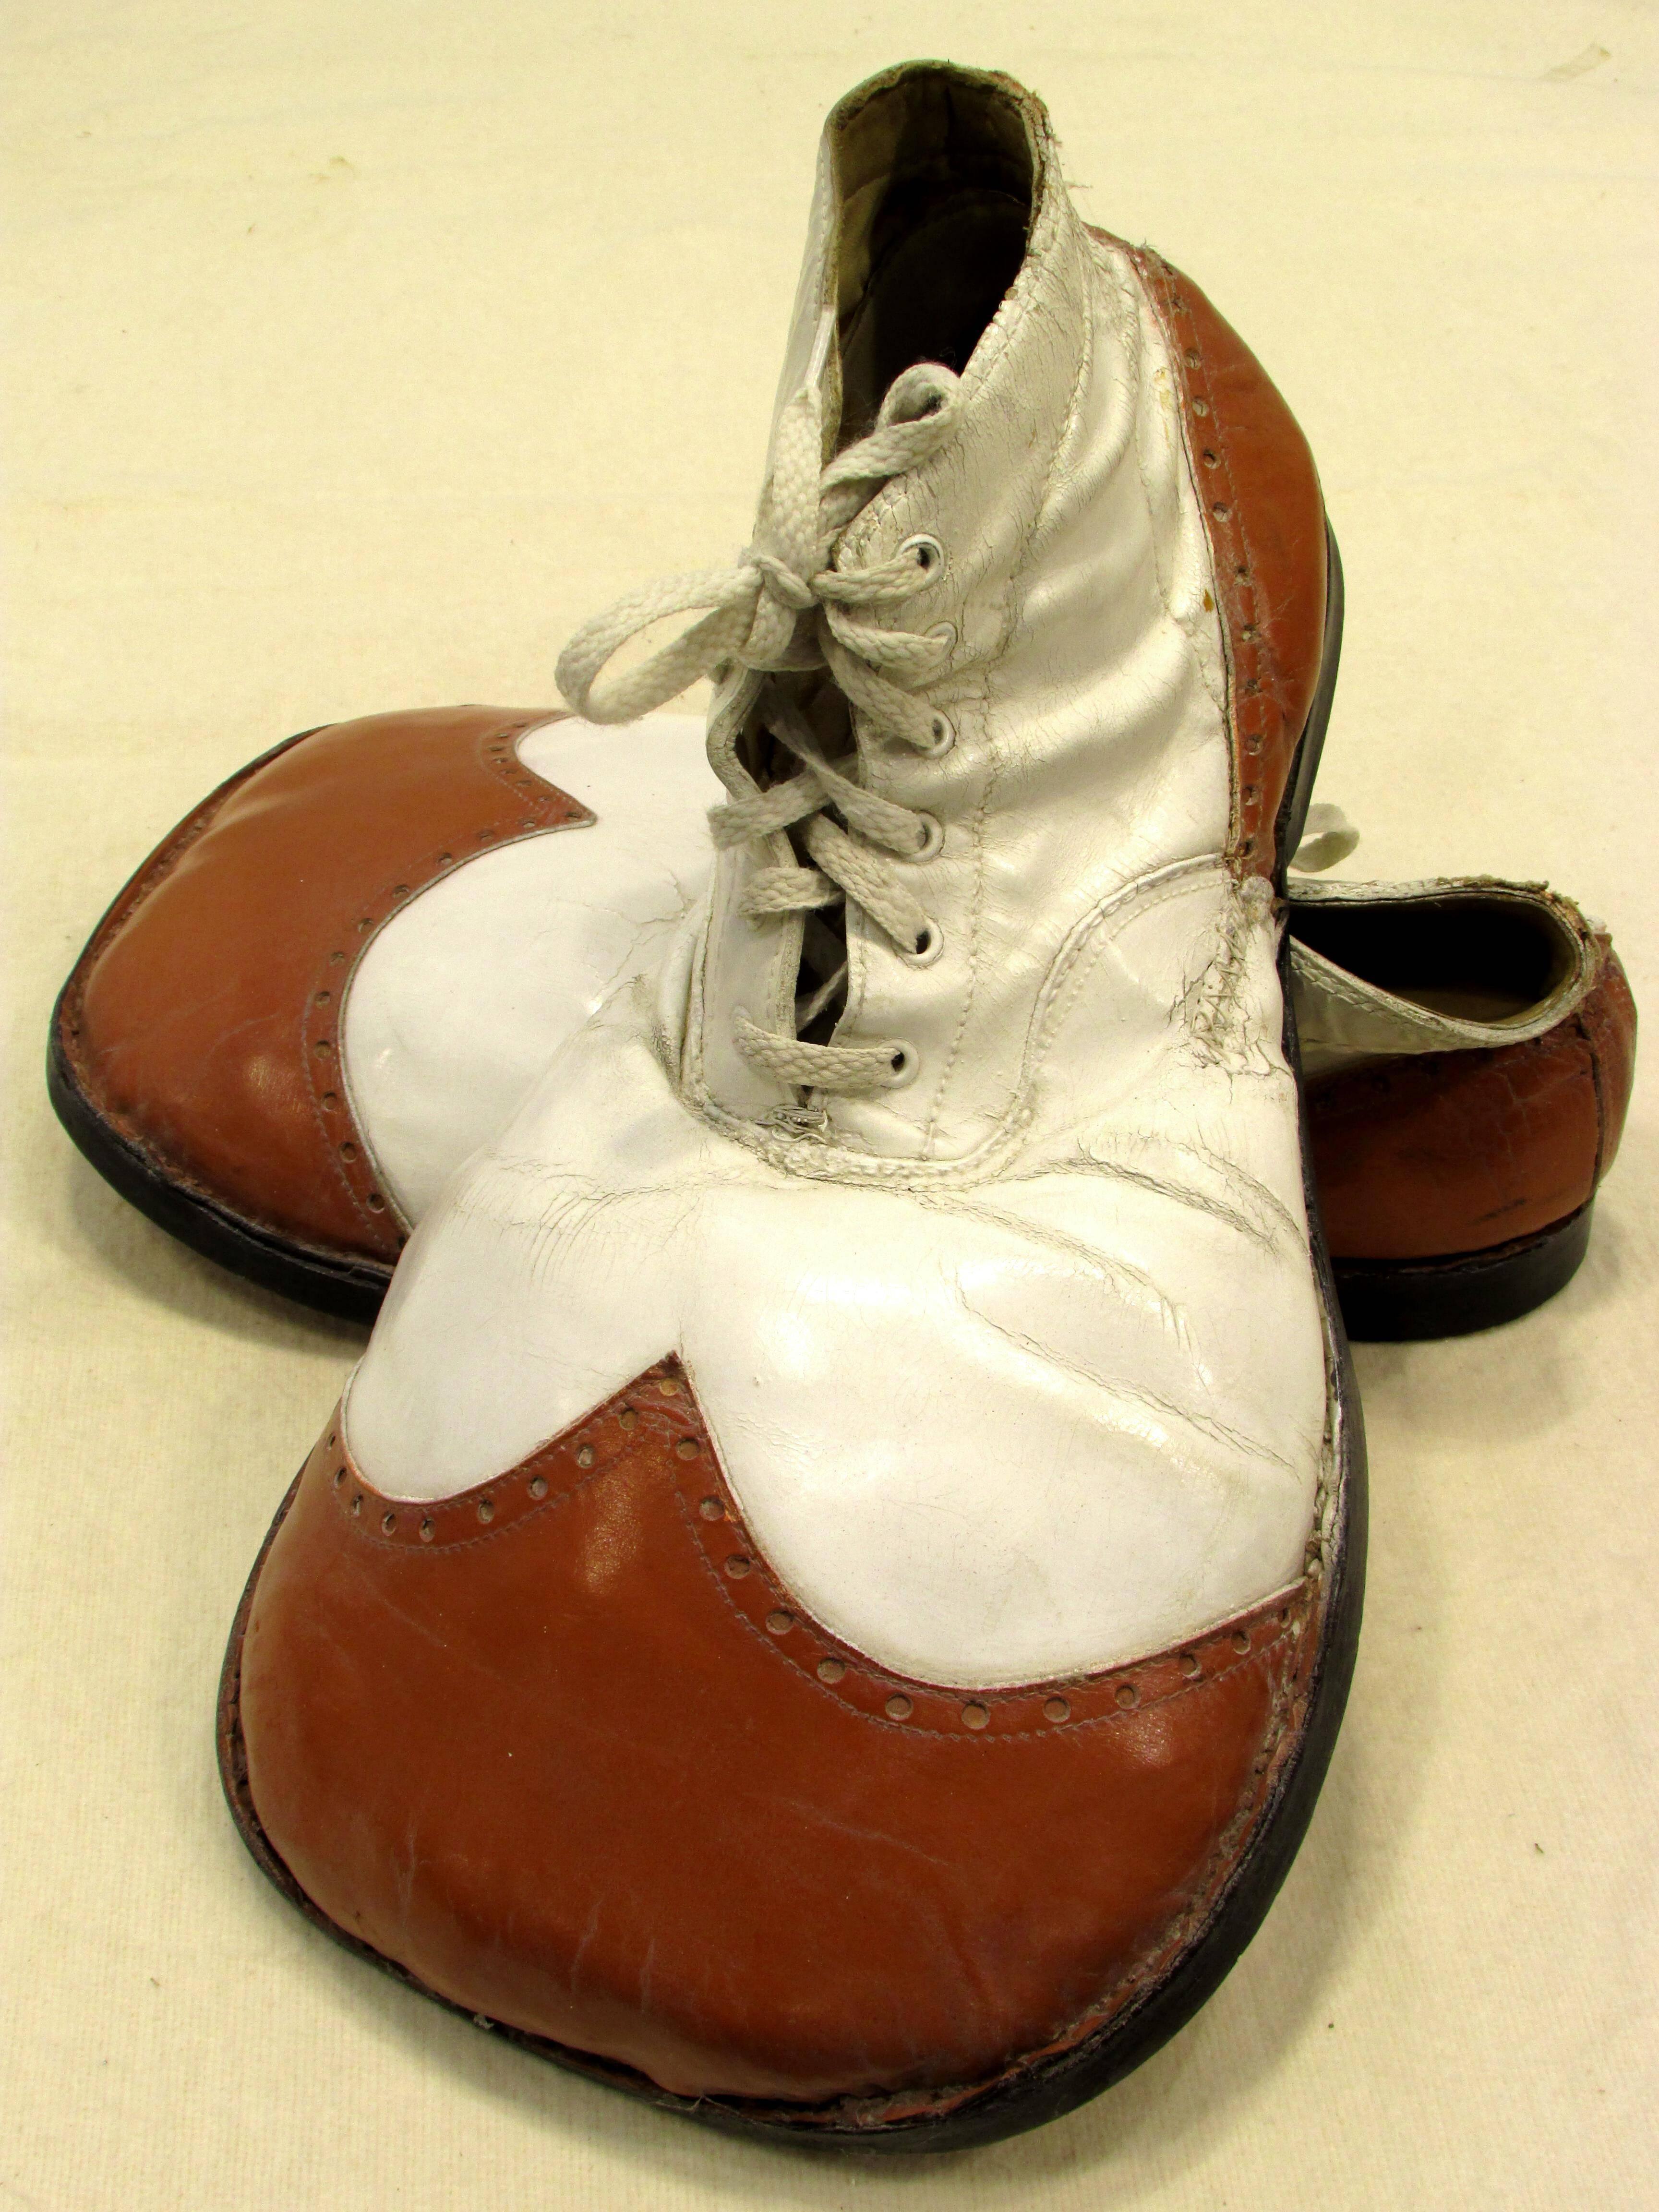 Pair of vintage big toed red and white clown shoes with leather and rubber sole
From my collection of vintage Clown Shoes